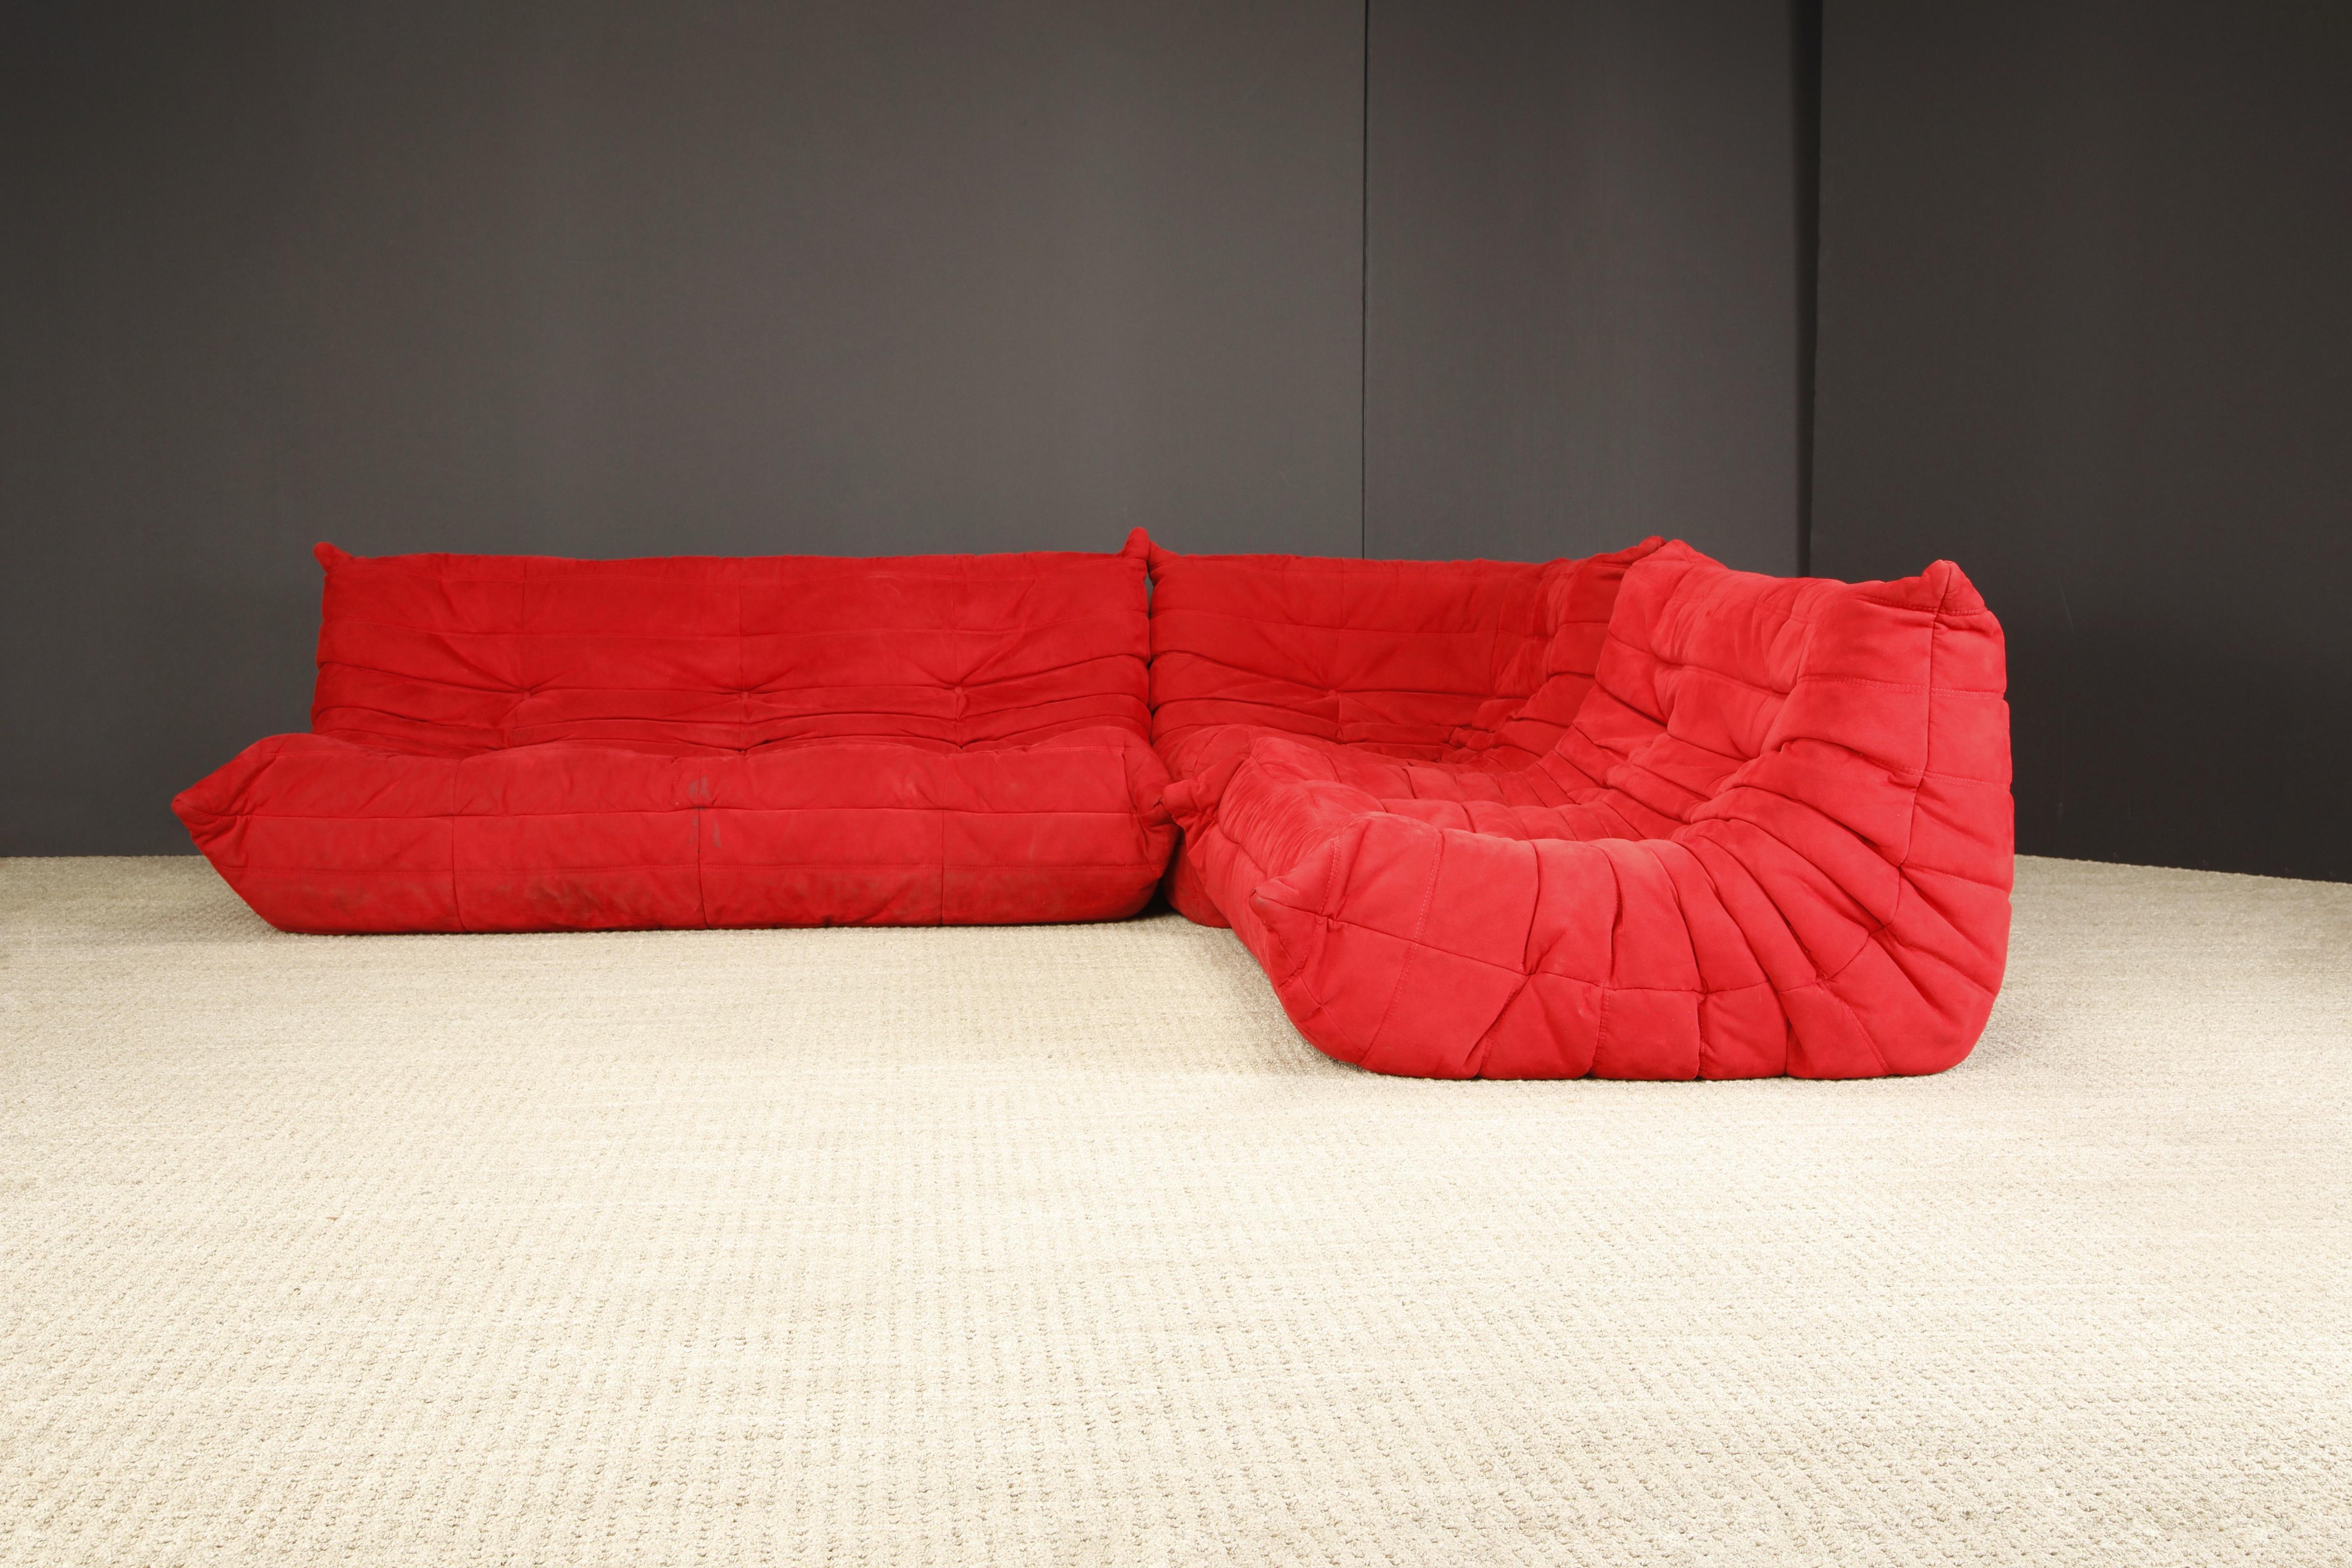 This designer on-trend 'Togo' sectional living room set, was designed by Michel Ducaroy in 1973 for Ligne Roset, France. Signed with Ligne Roset labels on each piece. This set comprised of a three-seat sofa, two-seat loveseat and a corner seat.